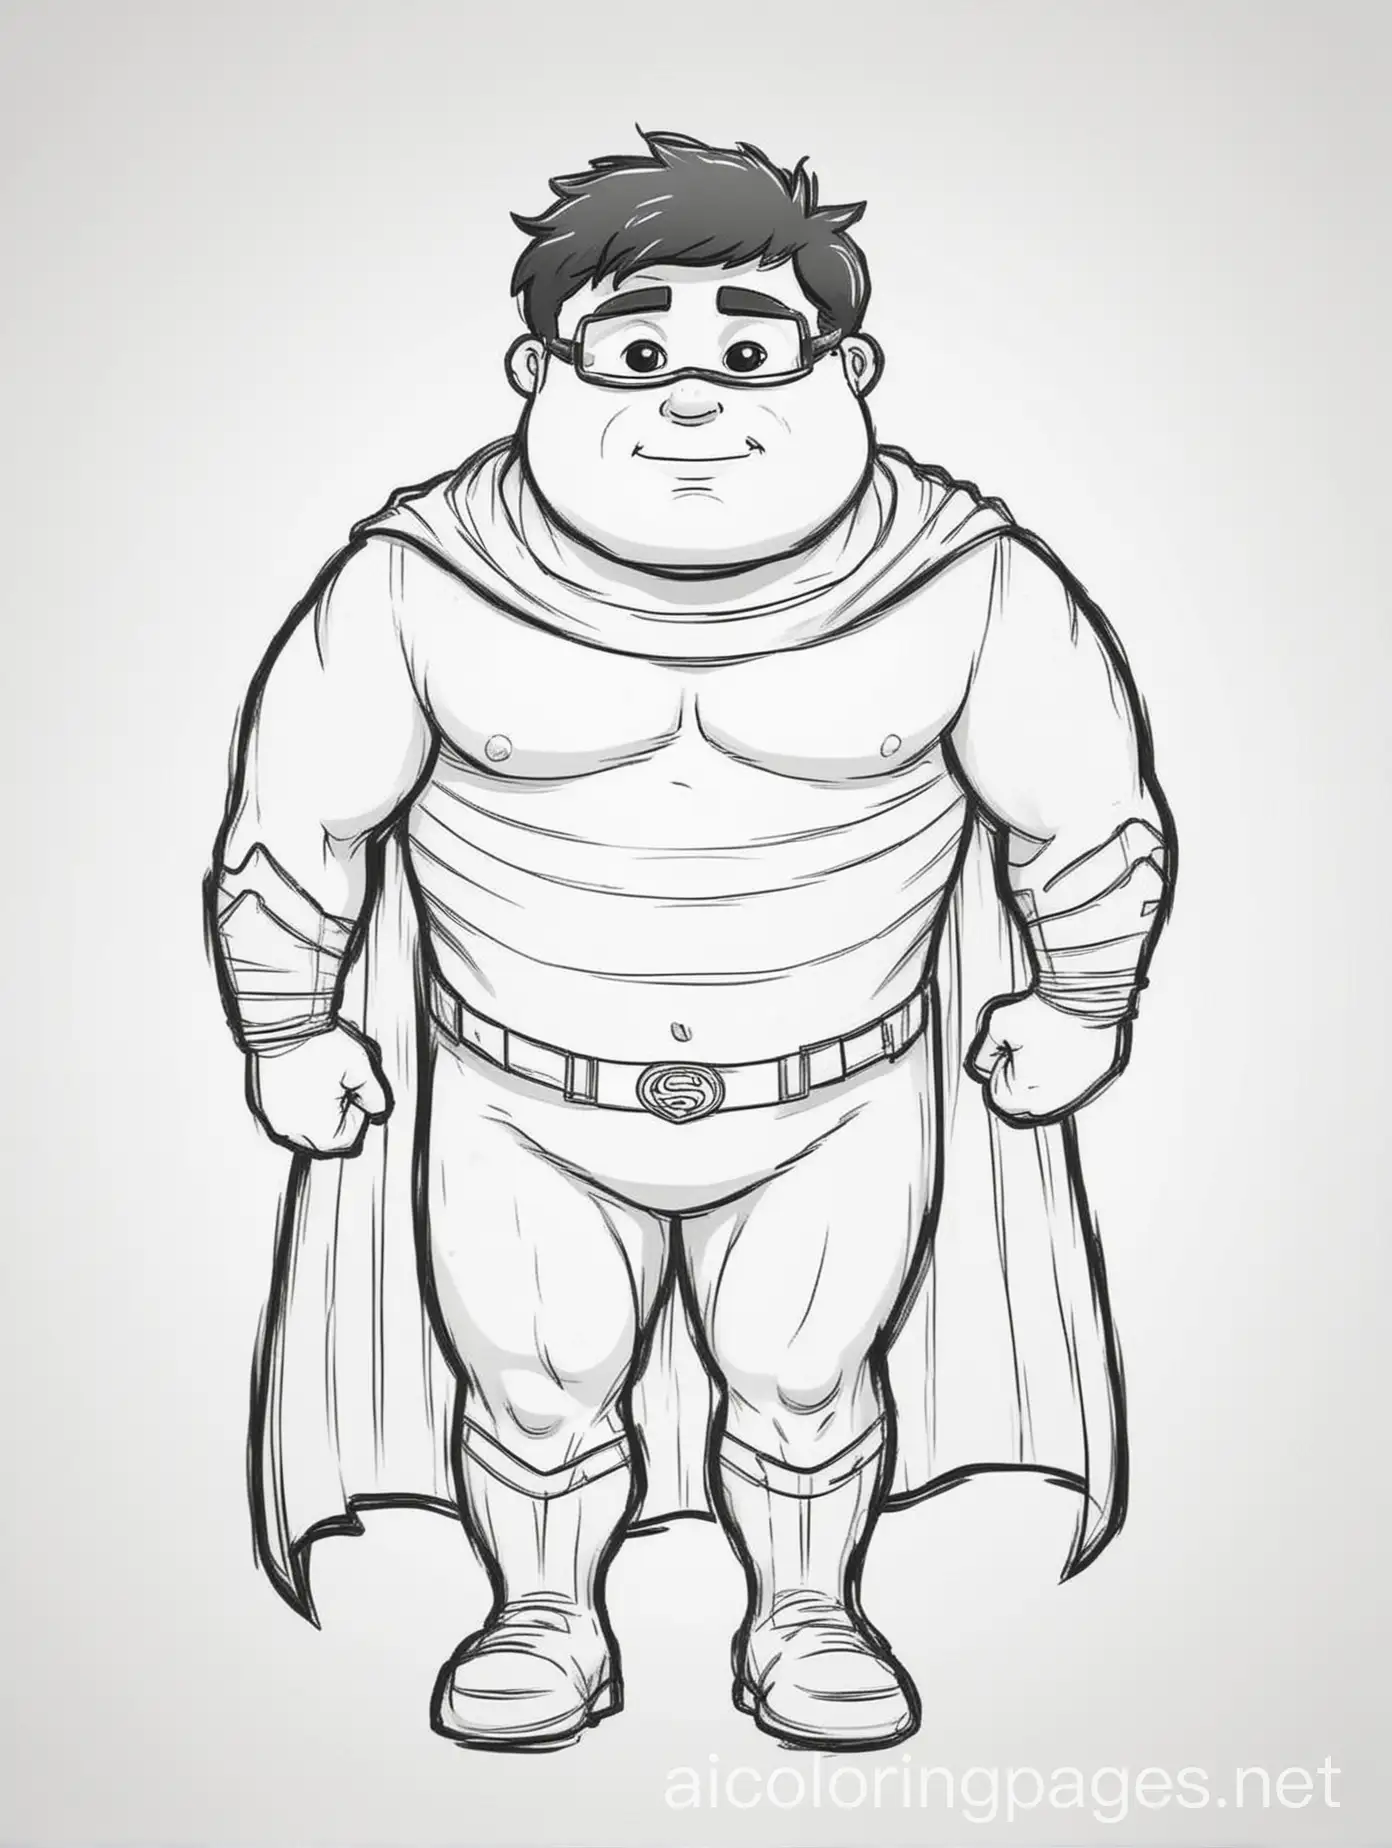 fat superhero, Coloring Page, black and white, line art, white background, Simplicity, Ample White Space. The background of the coloring page is plain white to make it easy for young children to color within the lines. The outlines of all the subjects are easy to distinguish, making it simple for kids to color without too much difficulty